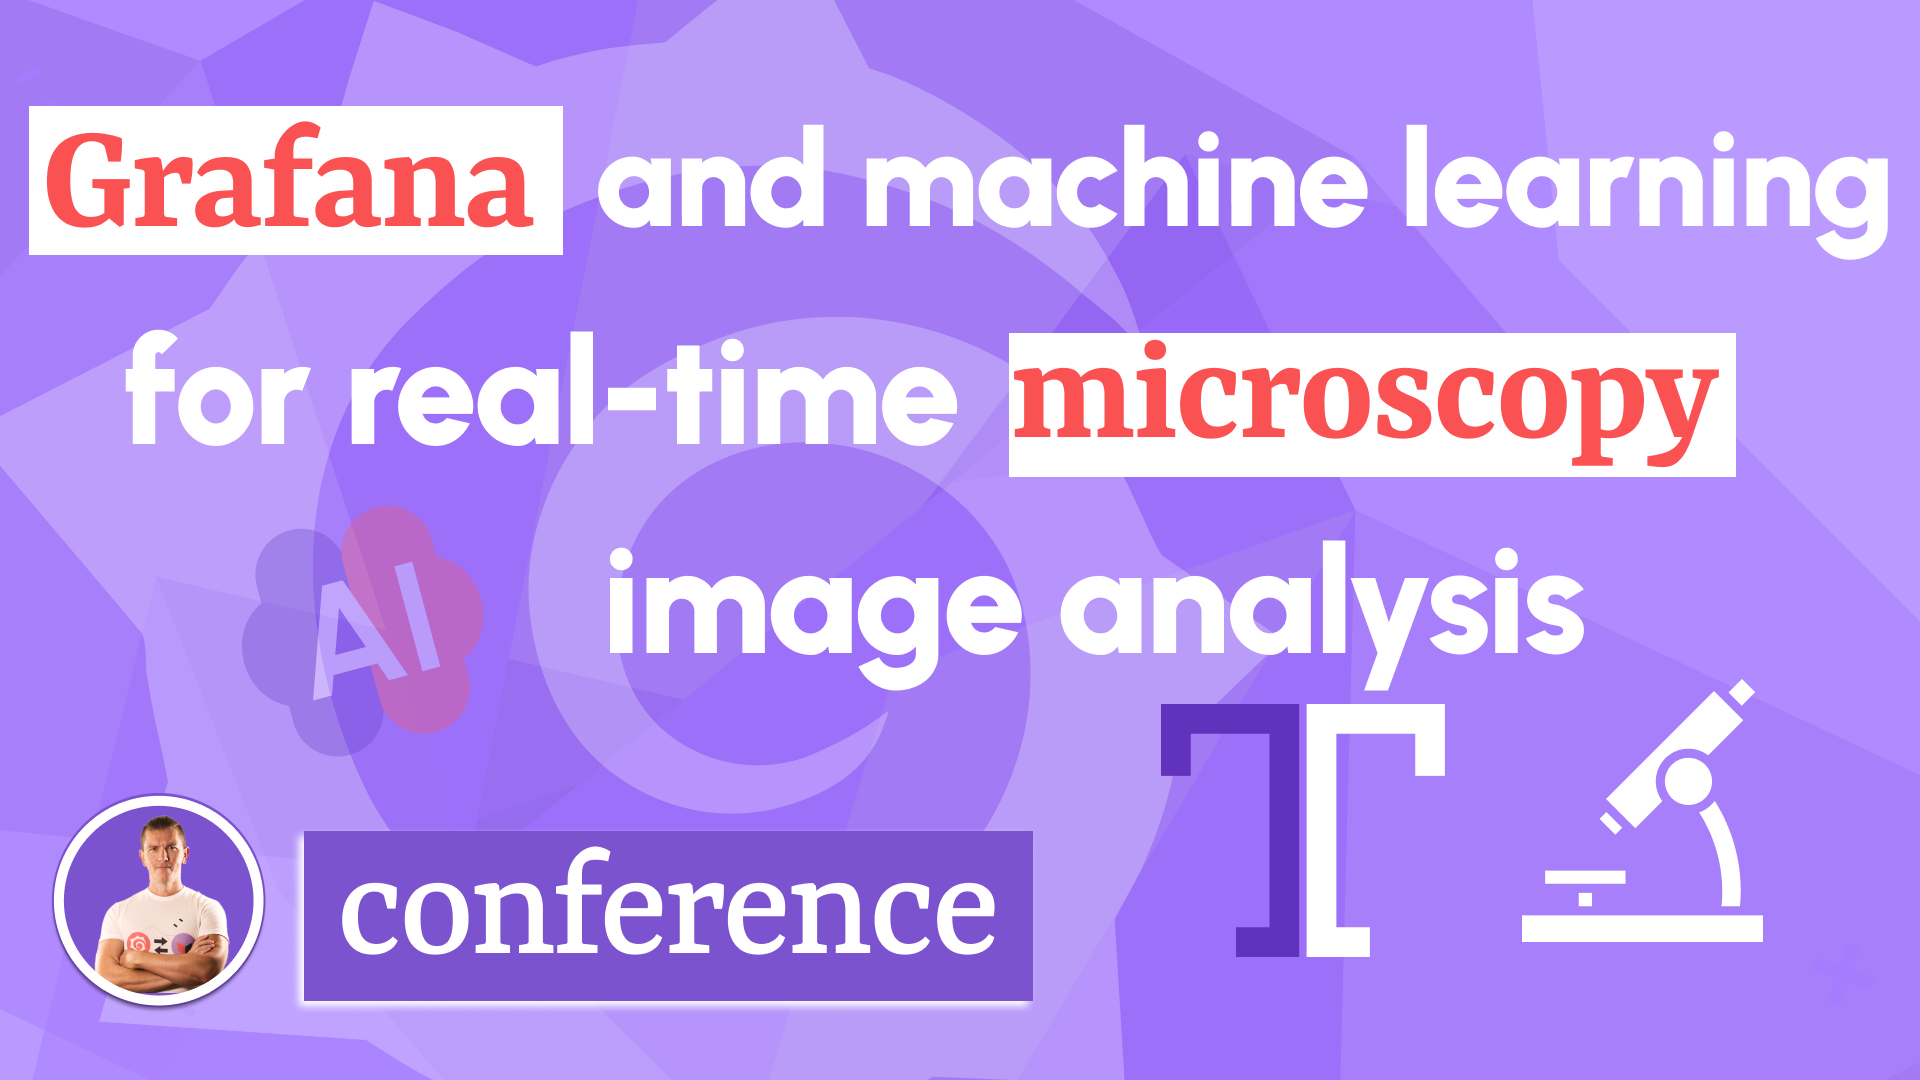 Using Grafana and machine learning for real-time microscopy image analysis